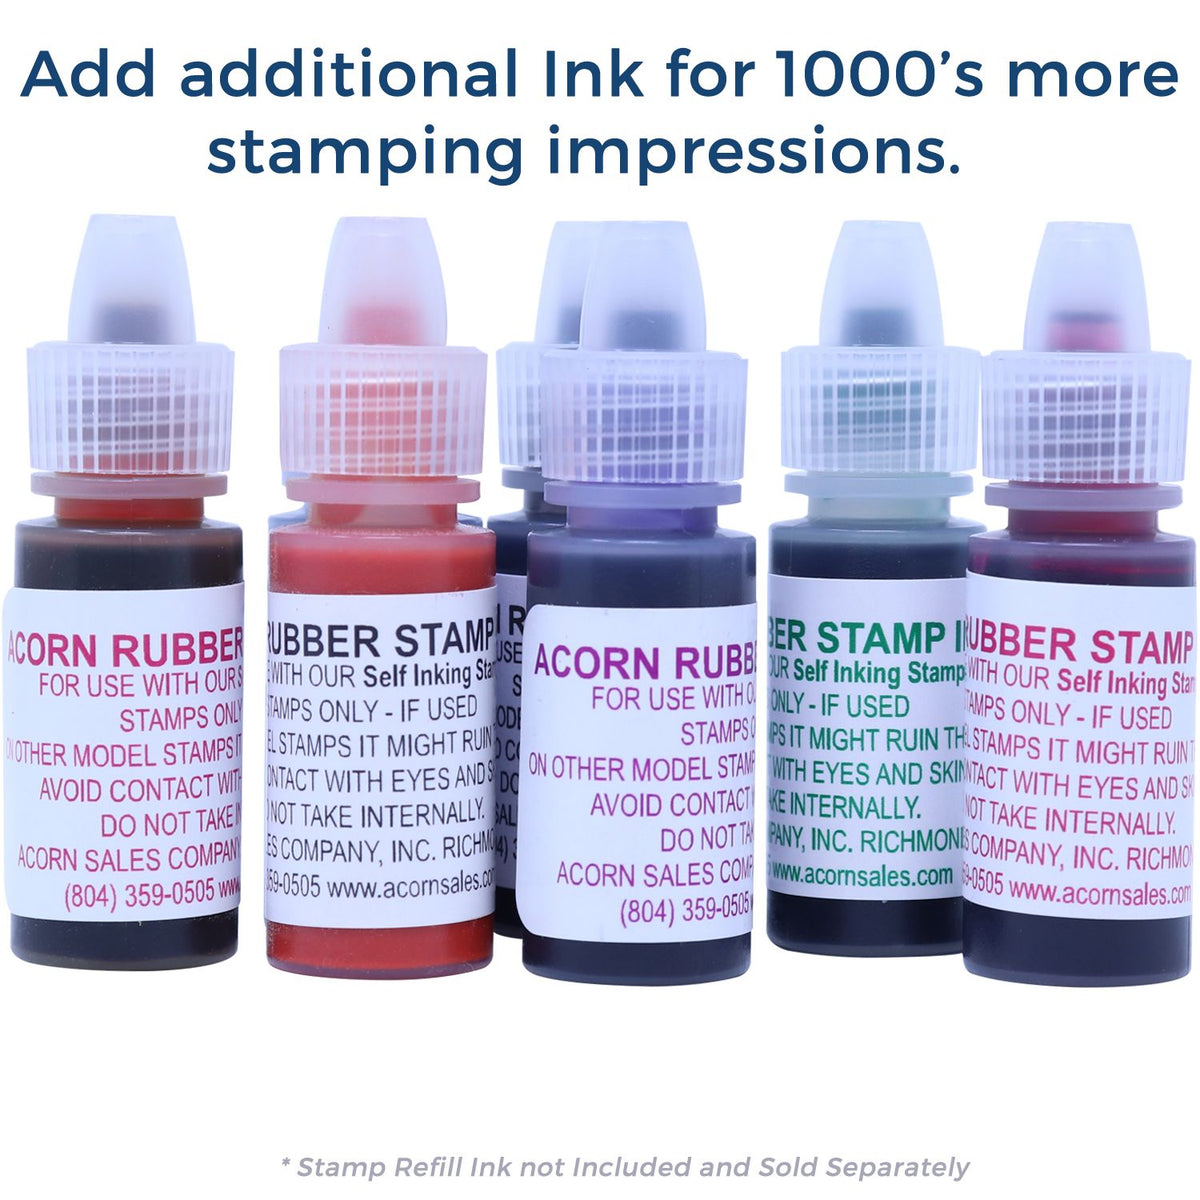 Refill Ink for Self-Inking Round Smiley with Sunglasses Stamp Available